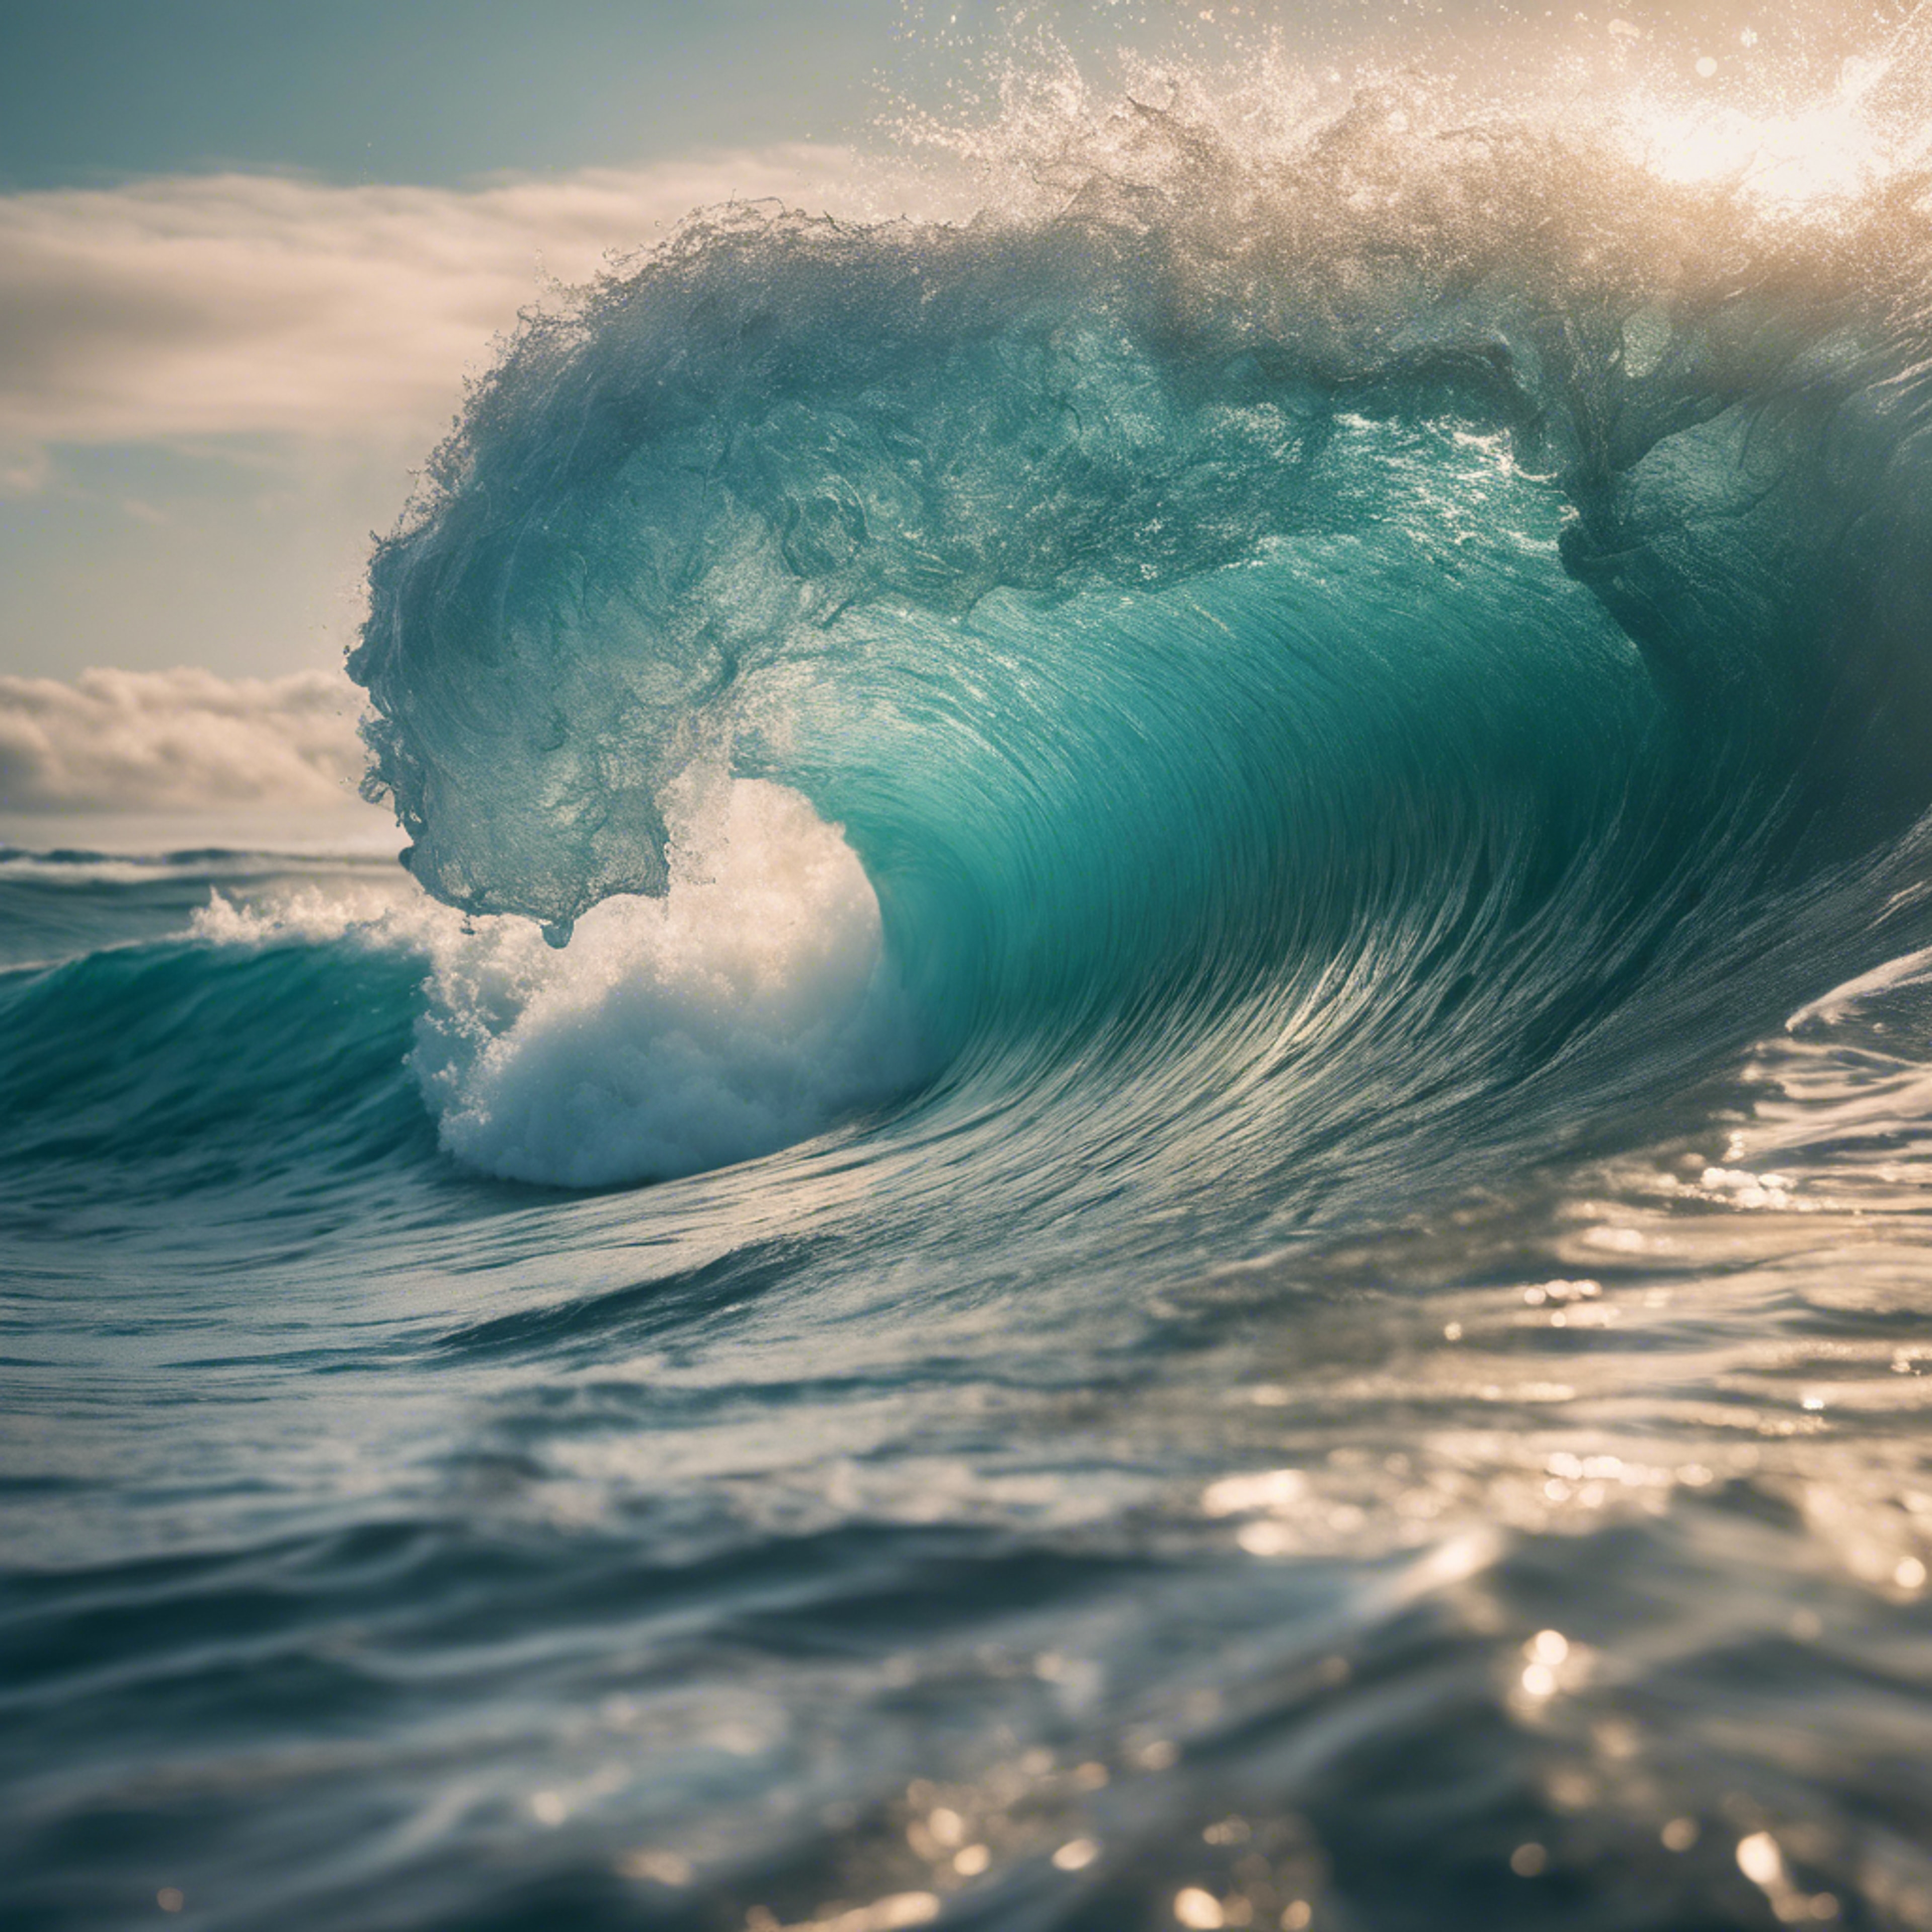 A powerful ocean wave about to crash, casting a cool teal hue. Taustakuva[600fa377246440af9acb]